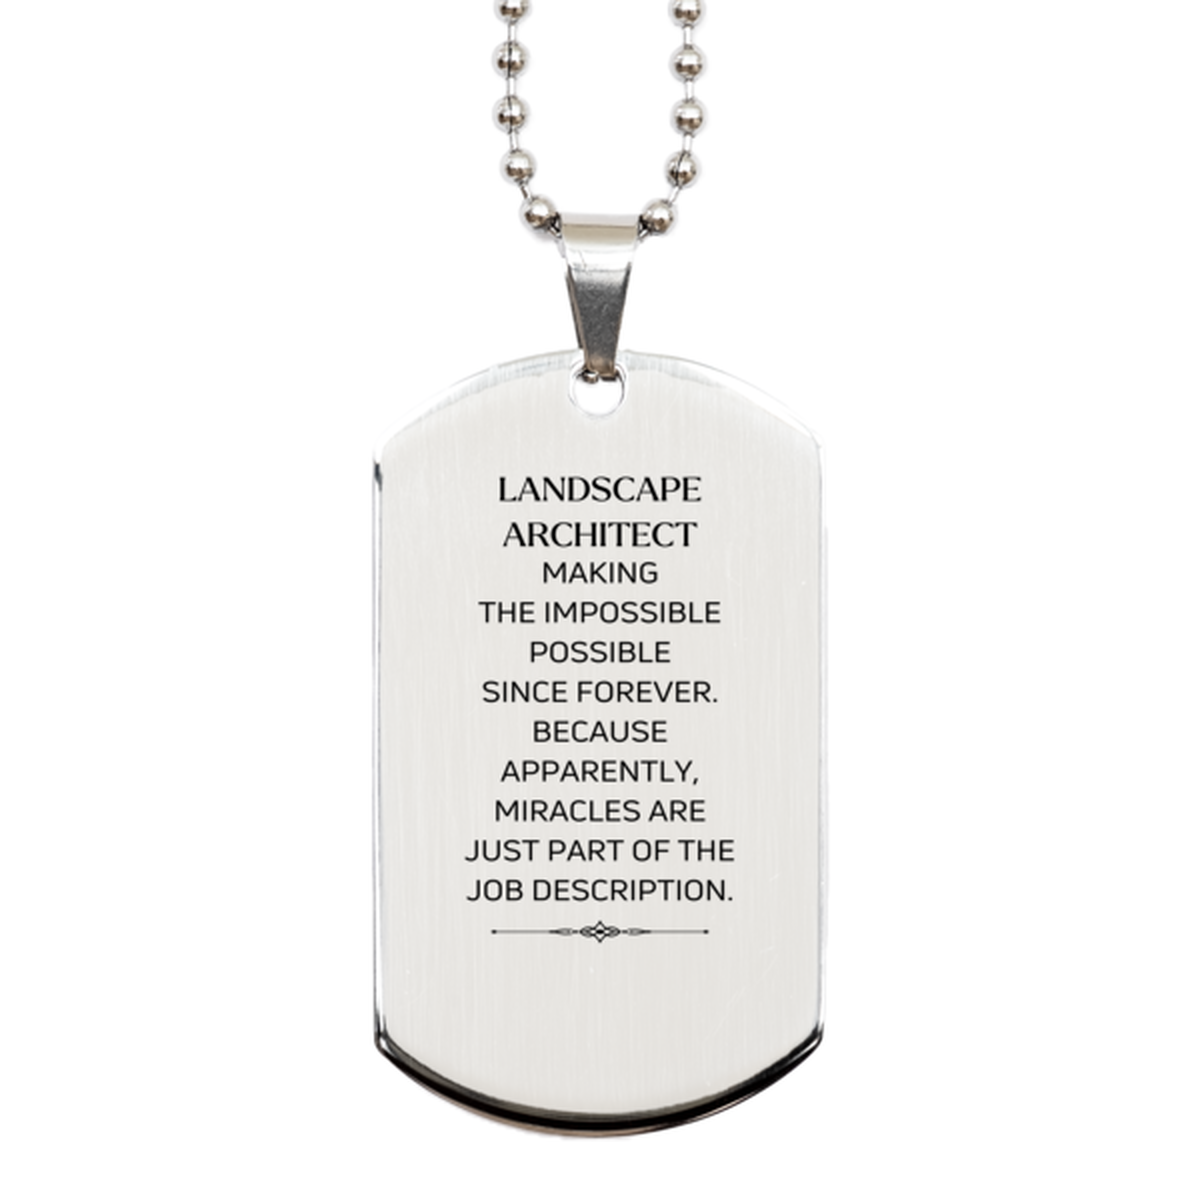 Funny Landscape Architect Gifts, Miracles are just part of the job description, Inspirational Birthday Silver Dog Tag For Landscape Architect, Men, Women, Coworkers, Friends, Boss